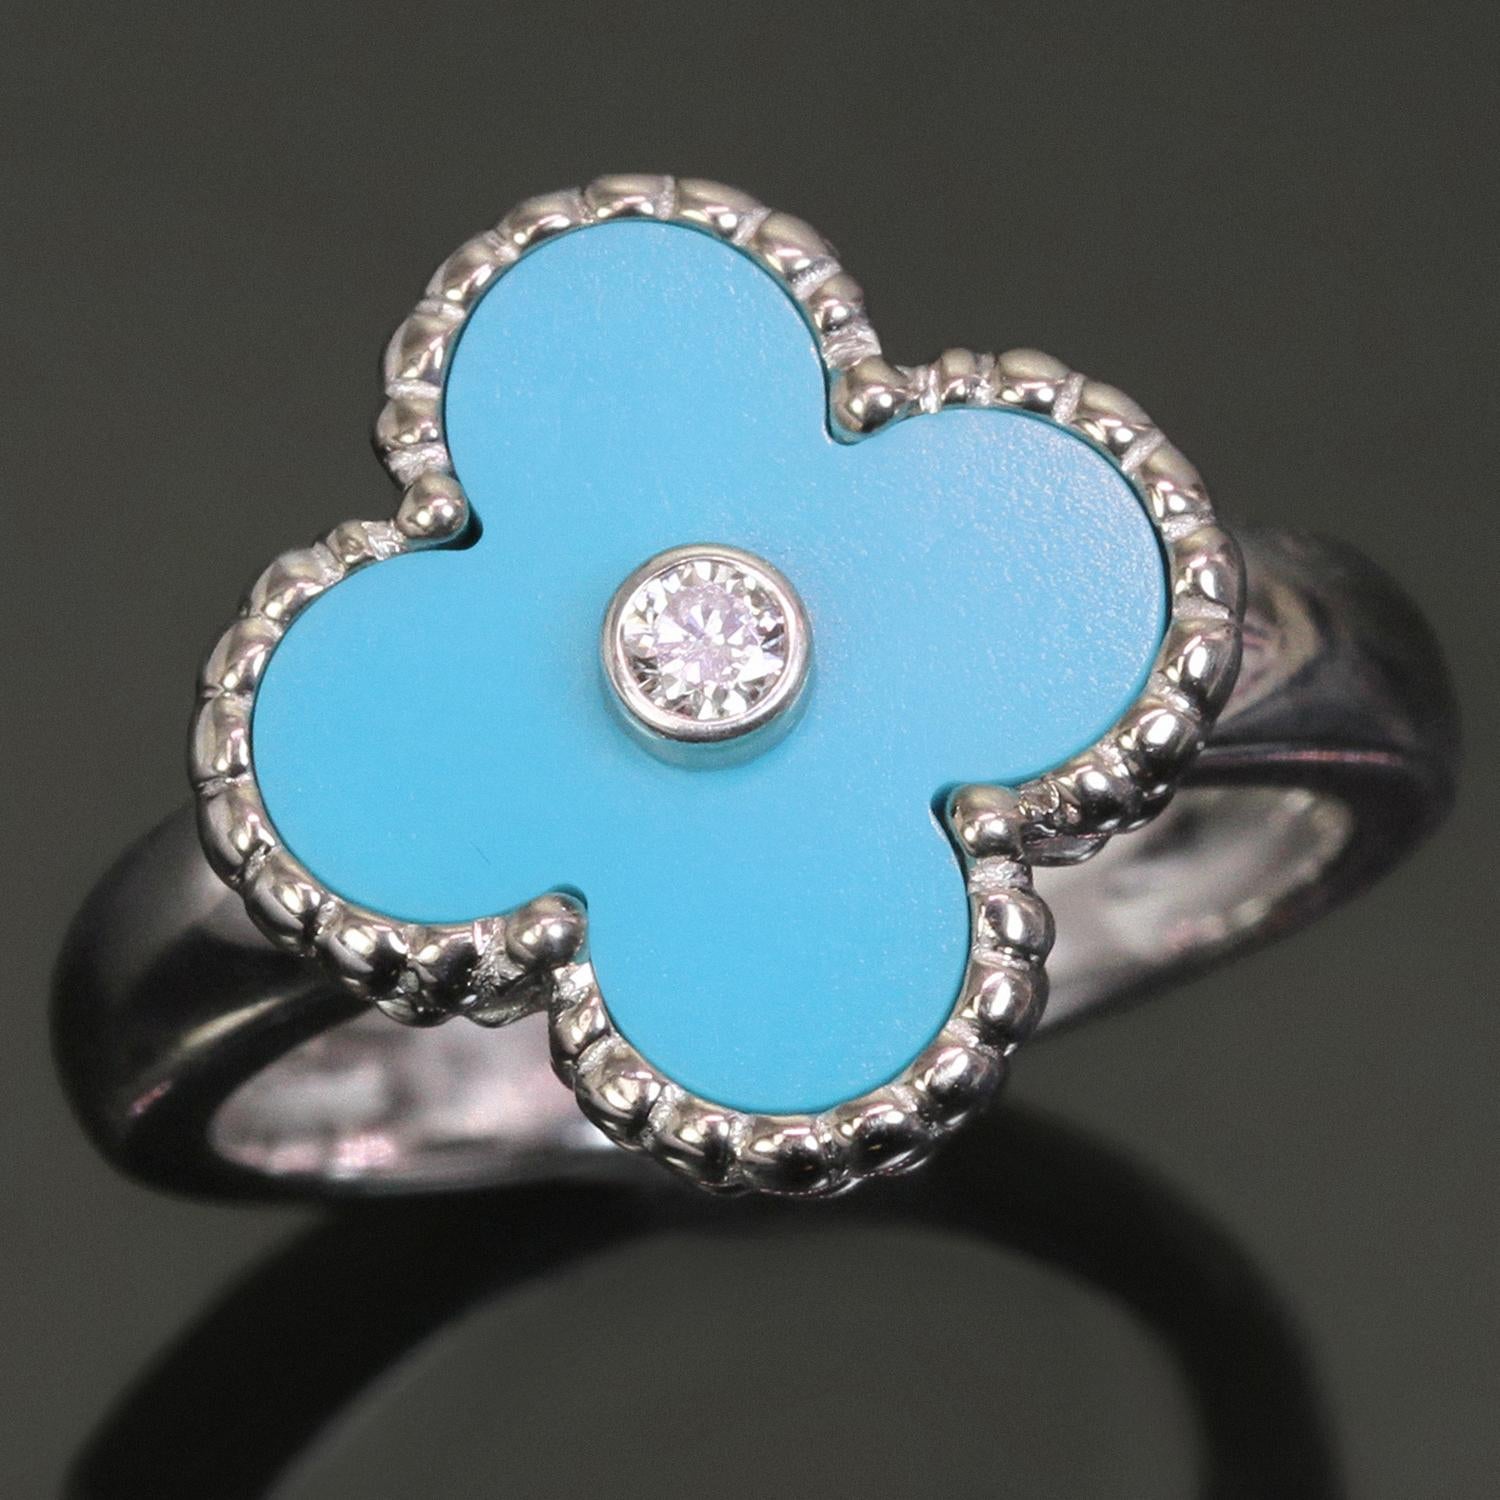 This fabulous Van Cleef & Arpels ring from the iconic Alhambra collection features the lucky clover design crafted in 18k white gold, inlaid with blue turquoise and accented with a bezel-set brilliant-cut round D-E-F VVS1-VVS2 diamond weighing an